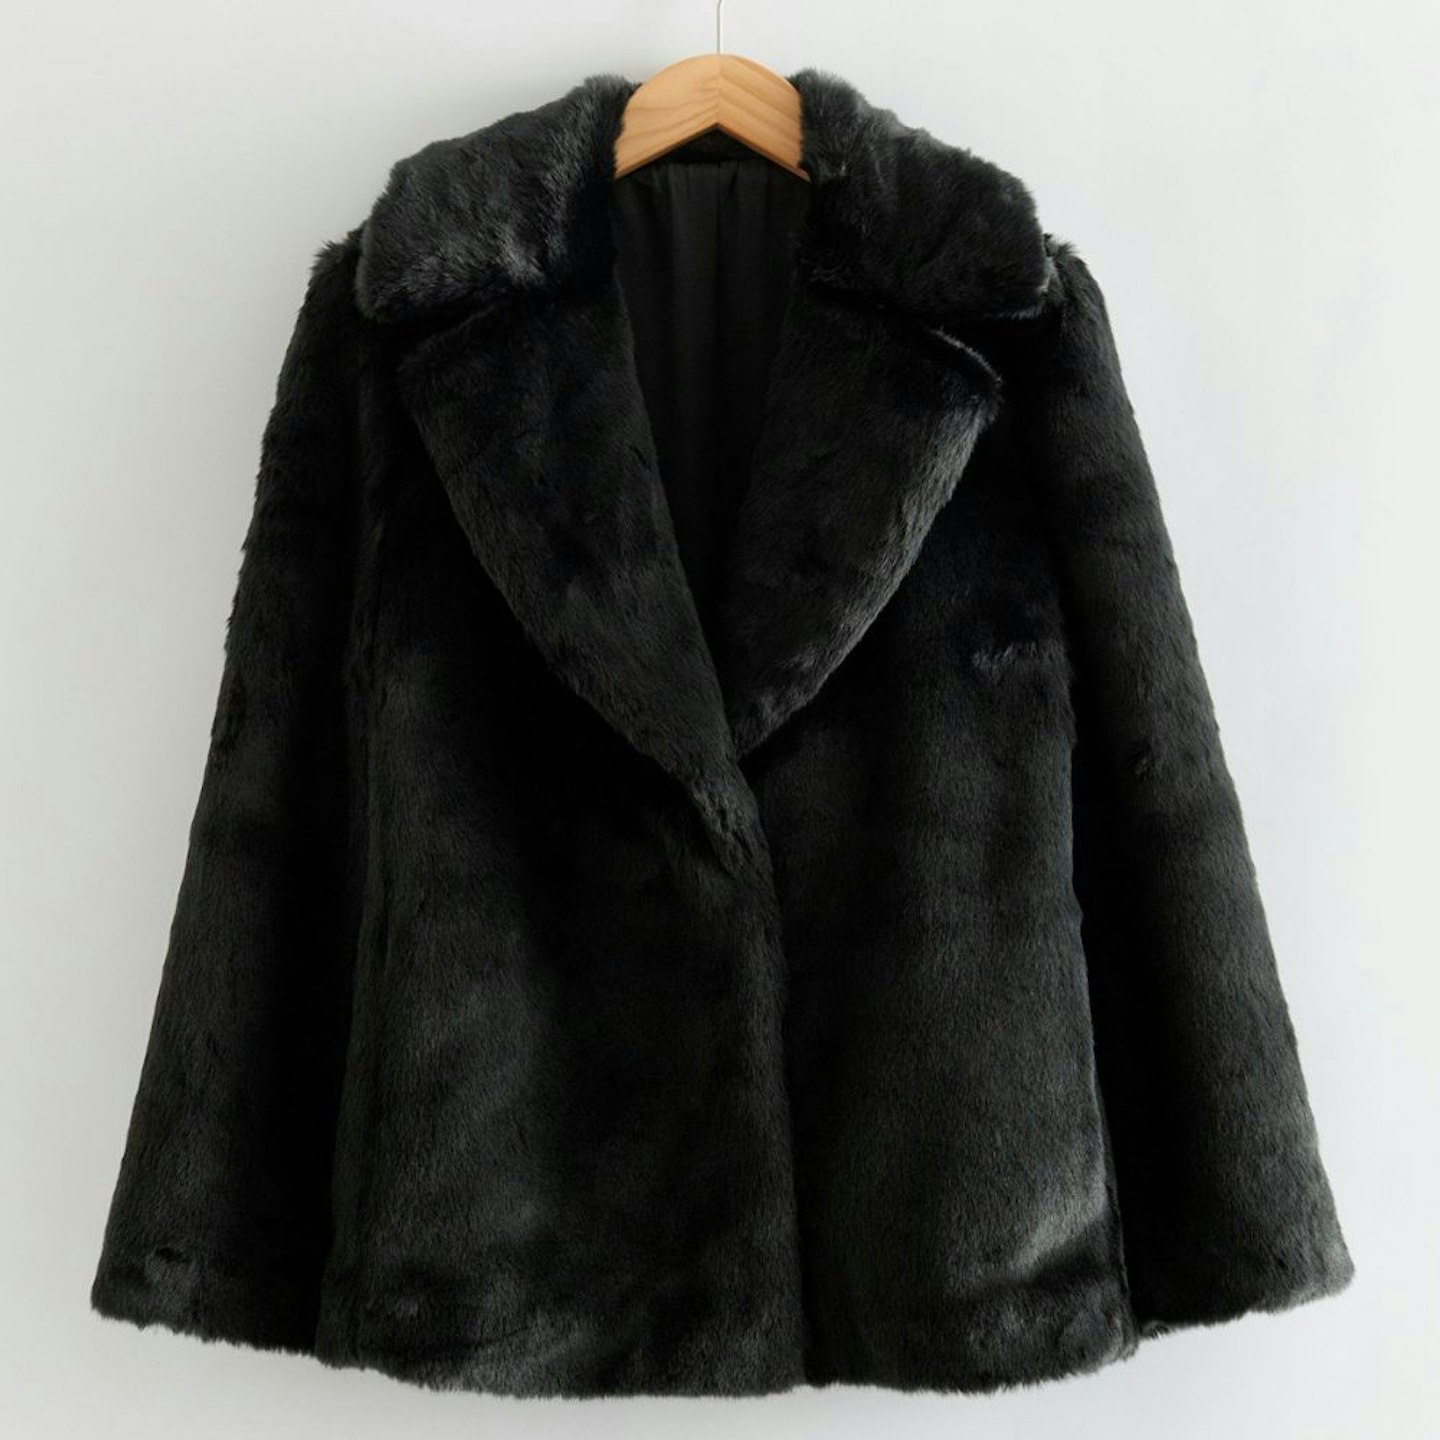 Other Stories Faux Fur Single-Breasted Coat